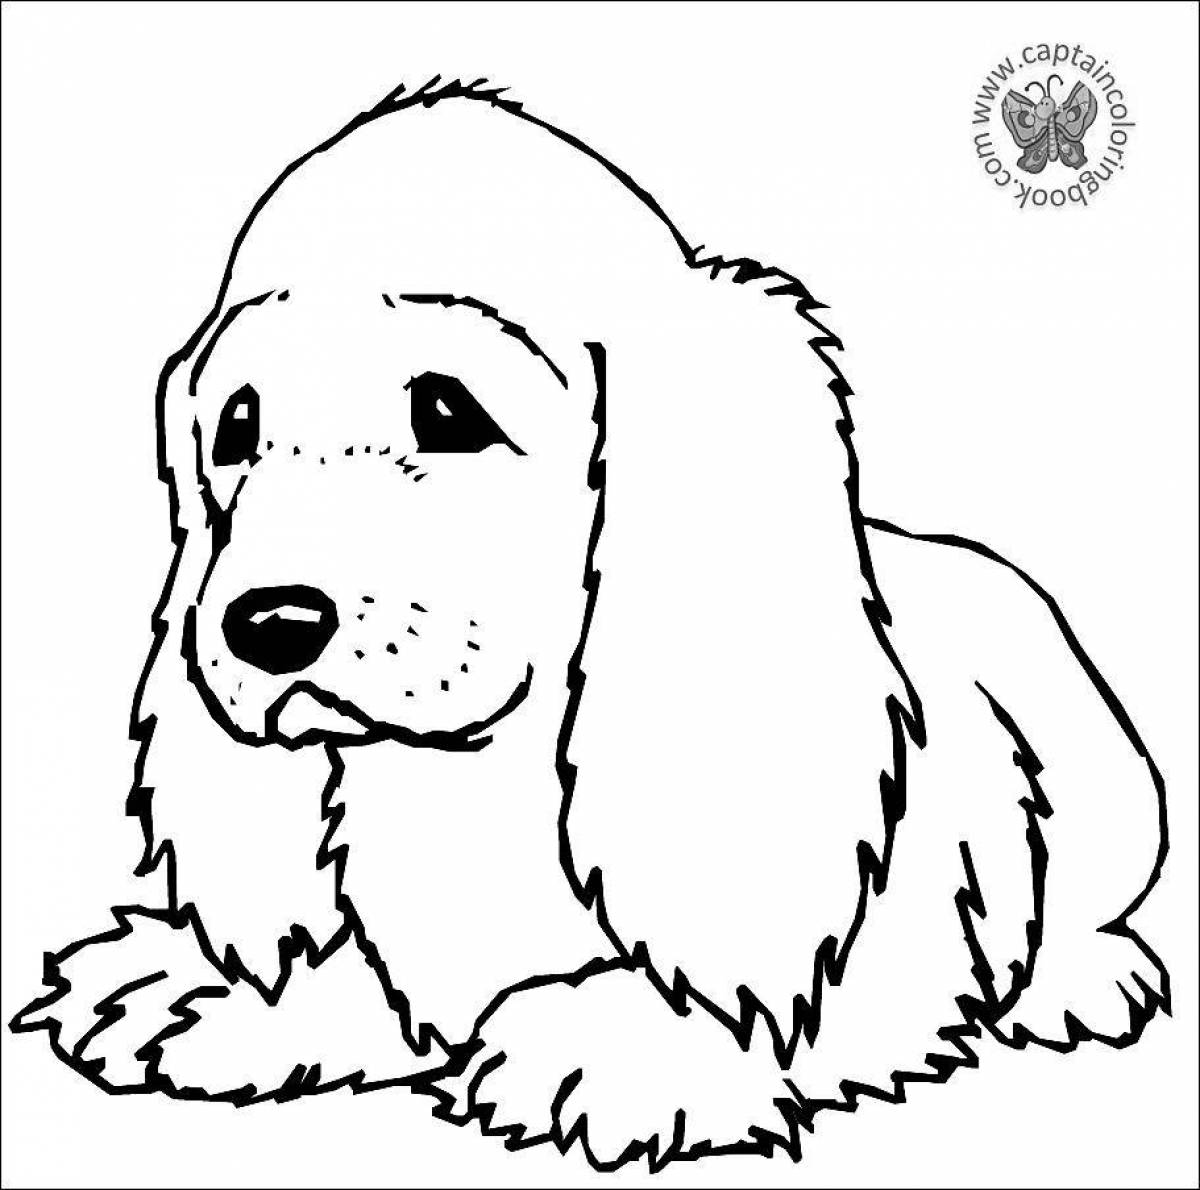 Funny light dog coloring book